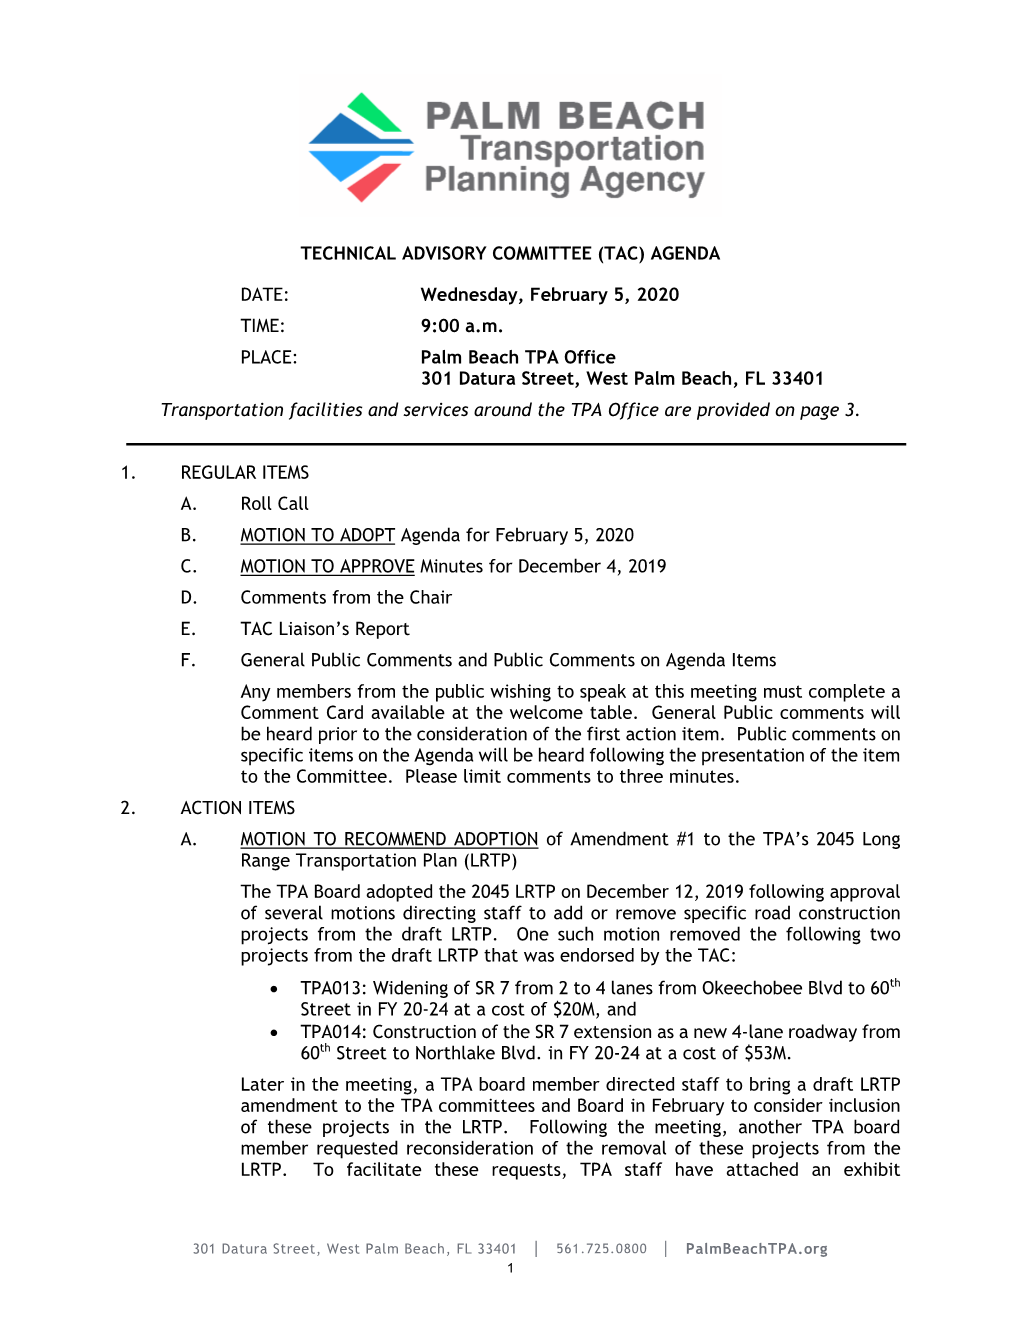 TECHNICAL ADVISORY COMMITTEE (TAC) AGENDA DATE: Wednesday, February 5, 2020 TIME: 9:00 A.M. PLACE: Palm Beach TPA Office 301